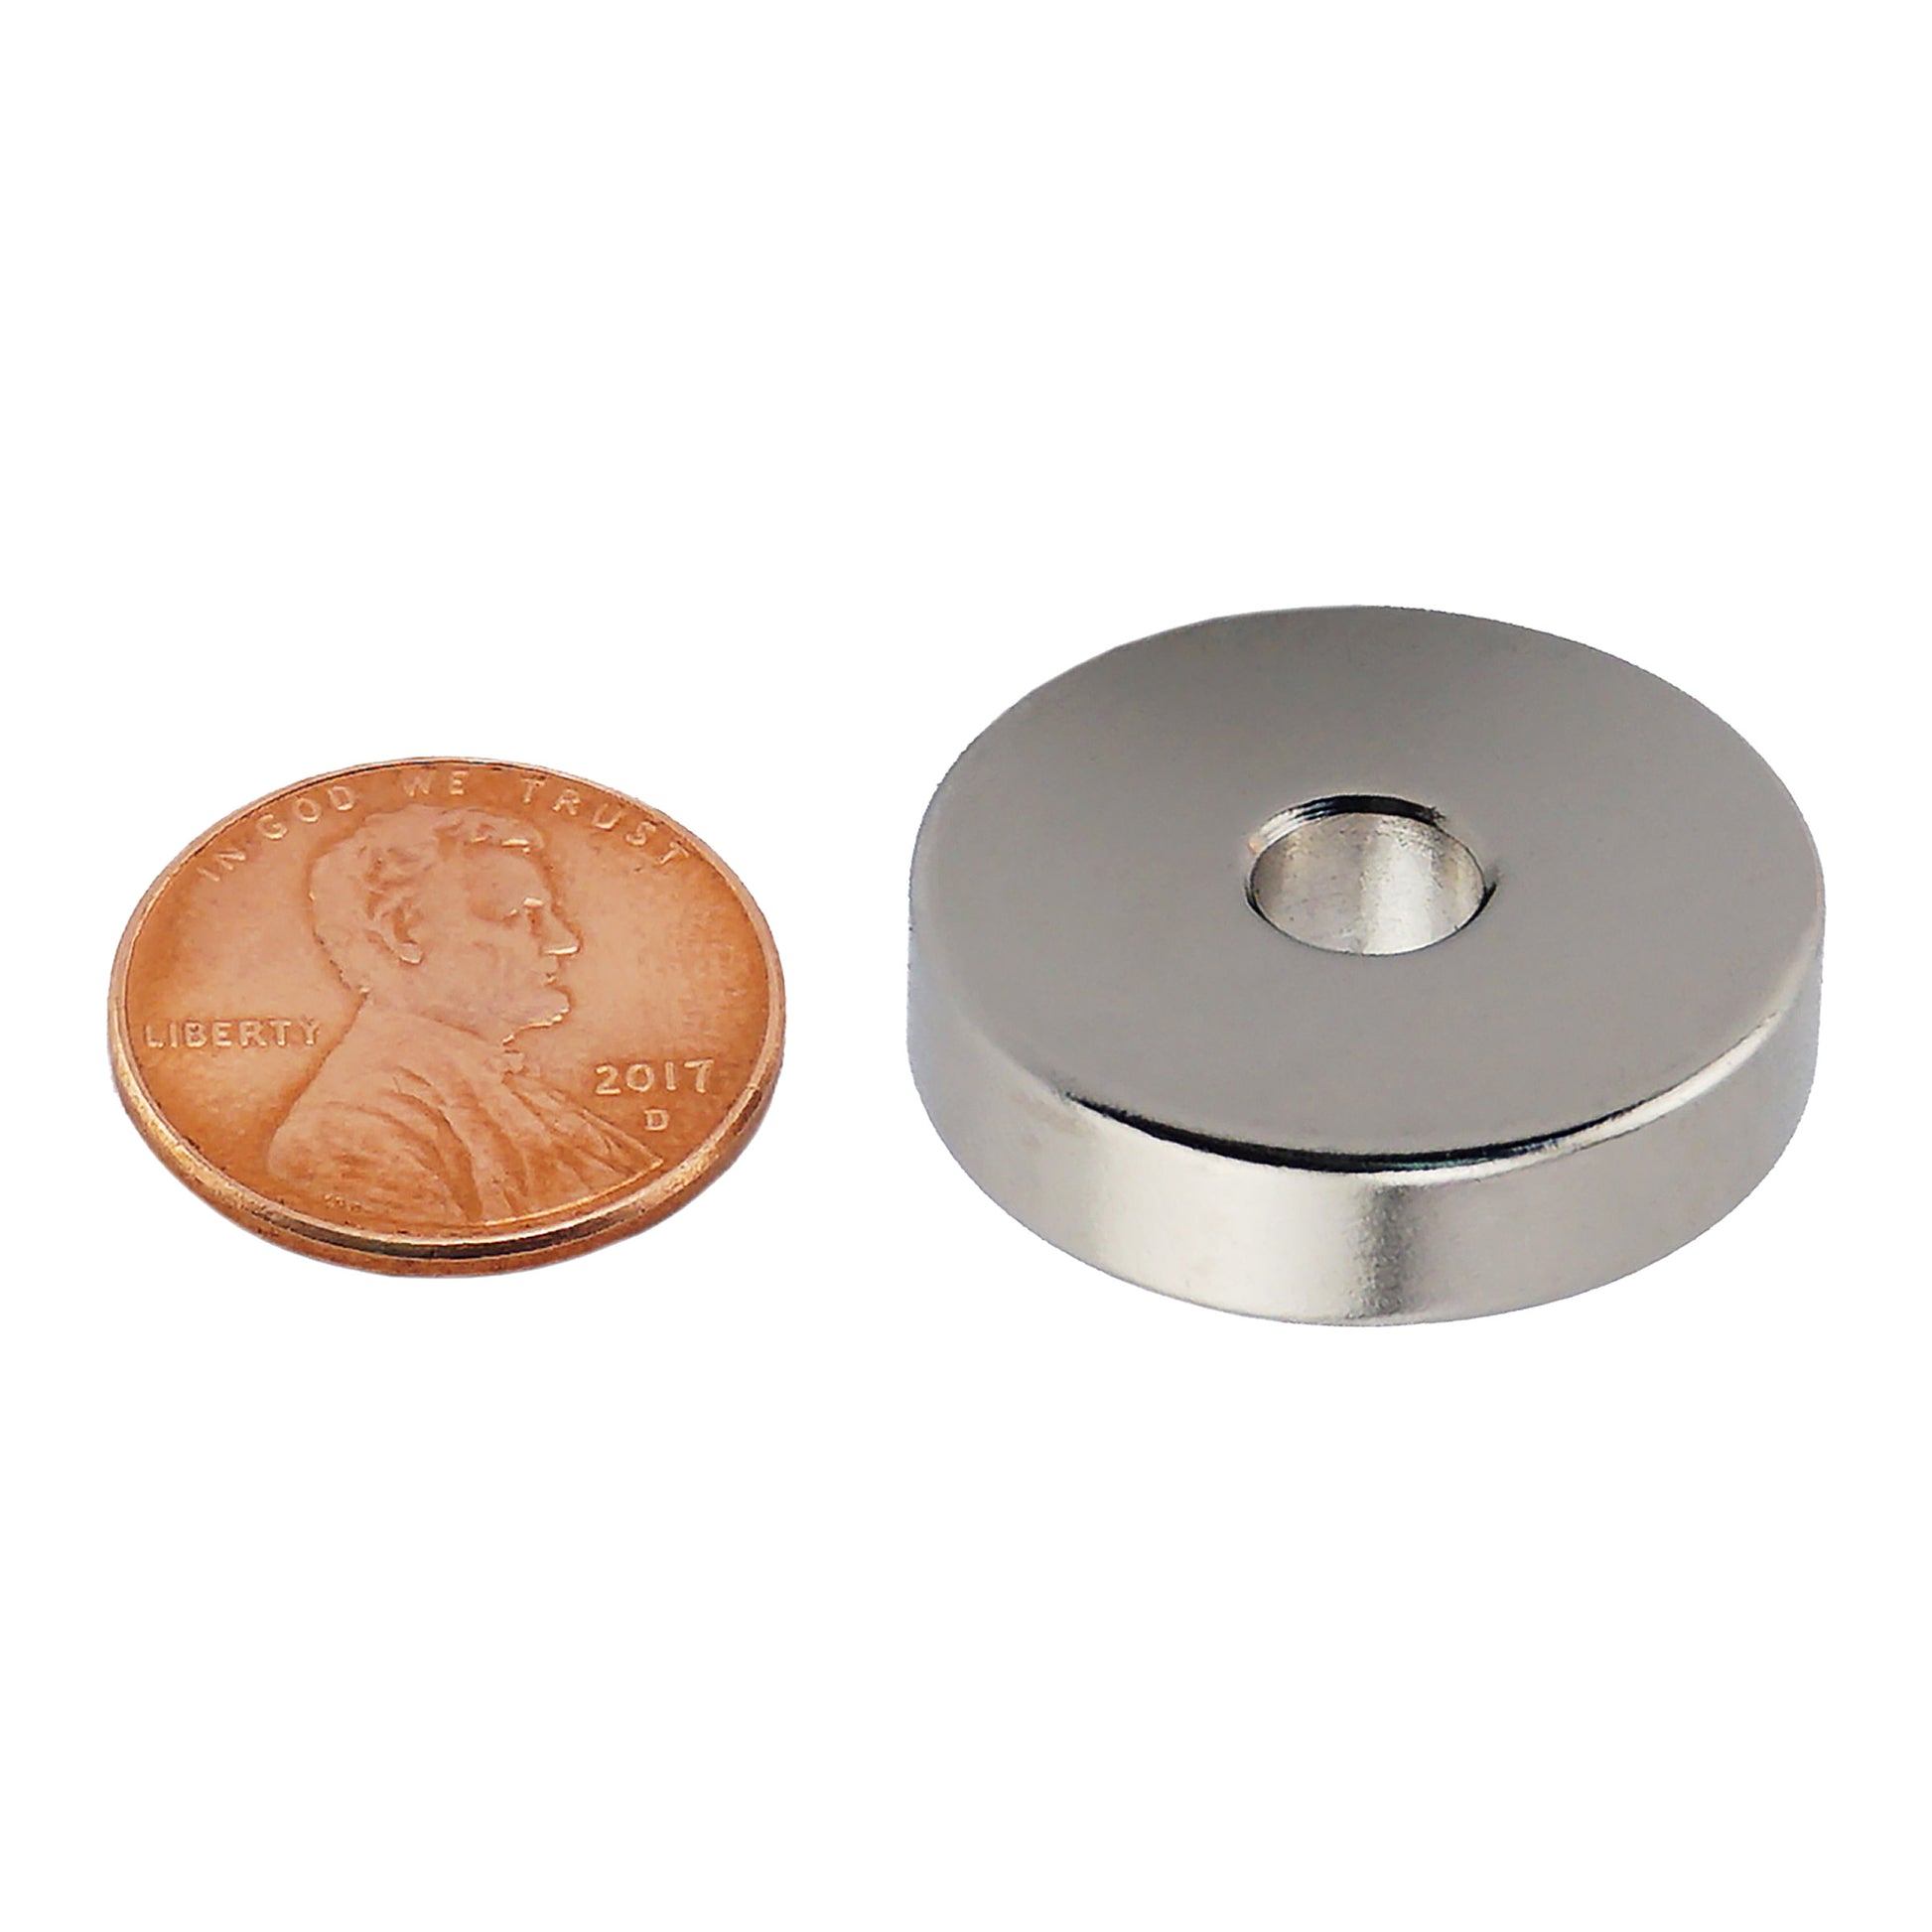 Load image into Gallery viewer, NR010026NS01 Neodymium Ring Magnet - Compared to Penny for Size Reference